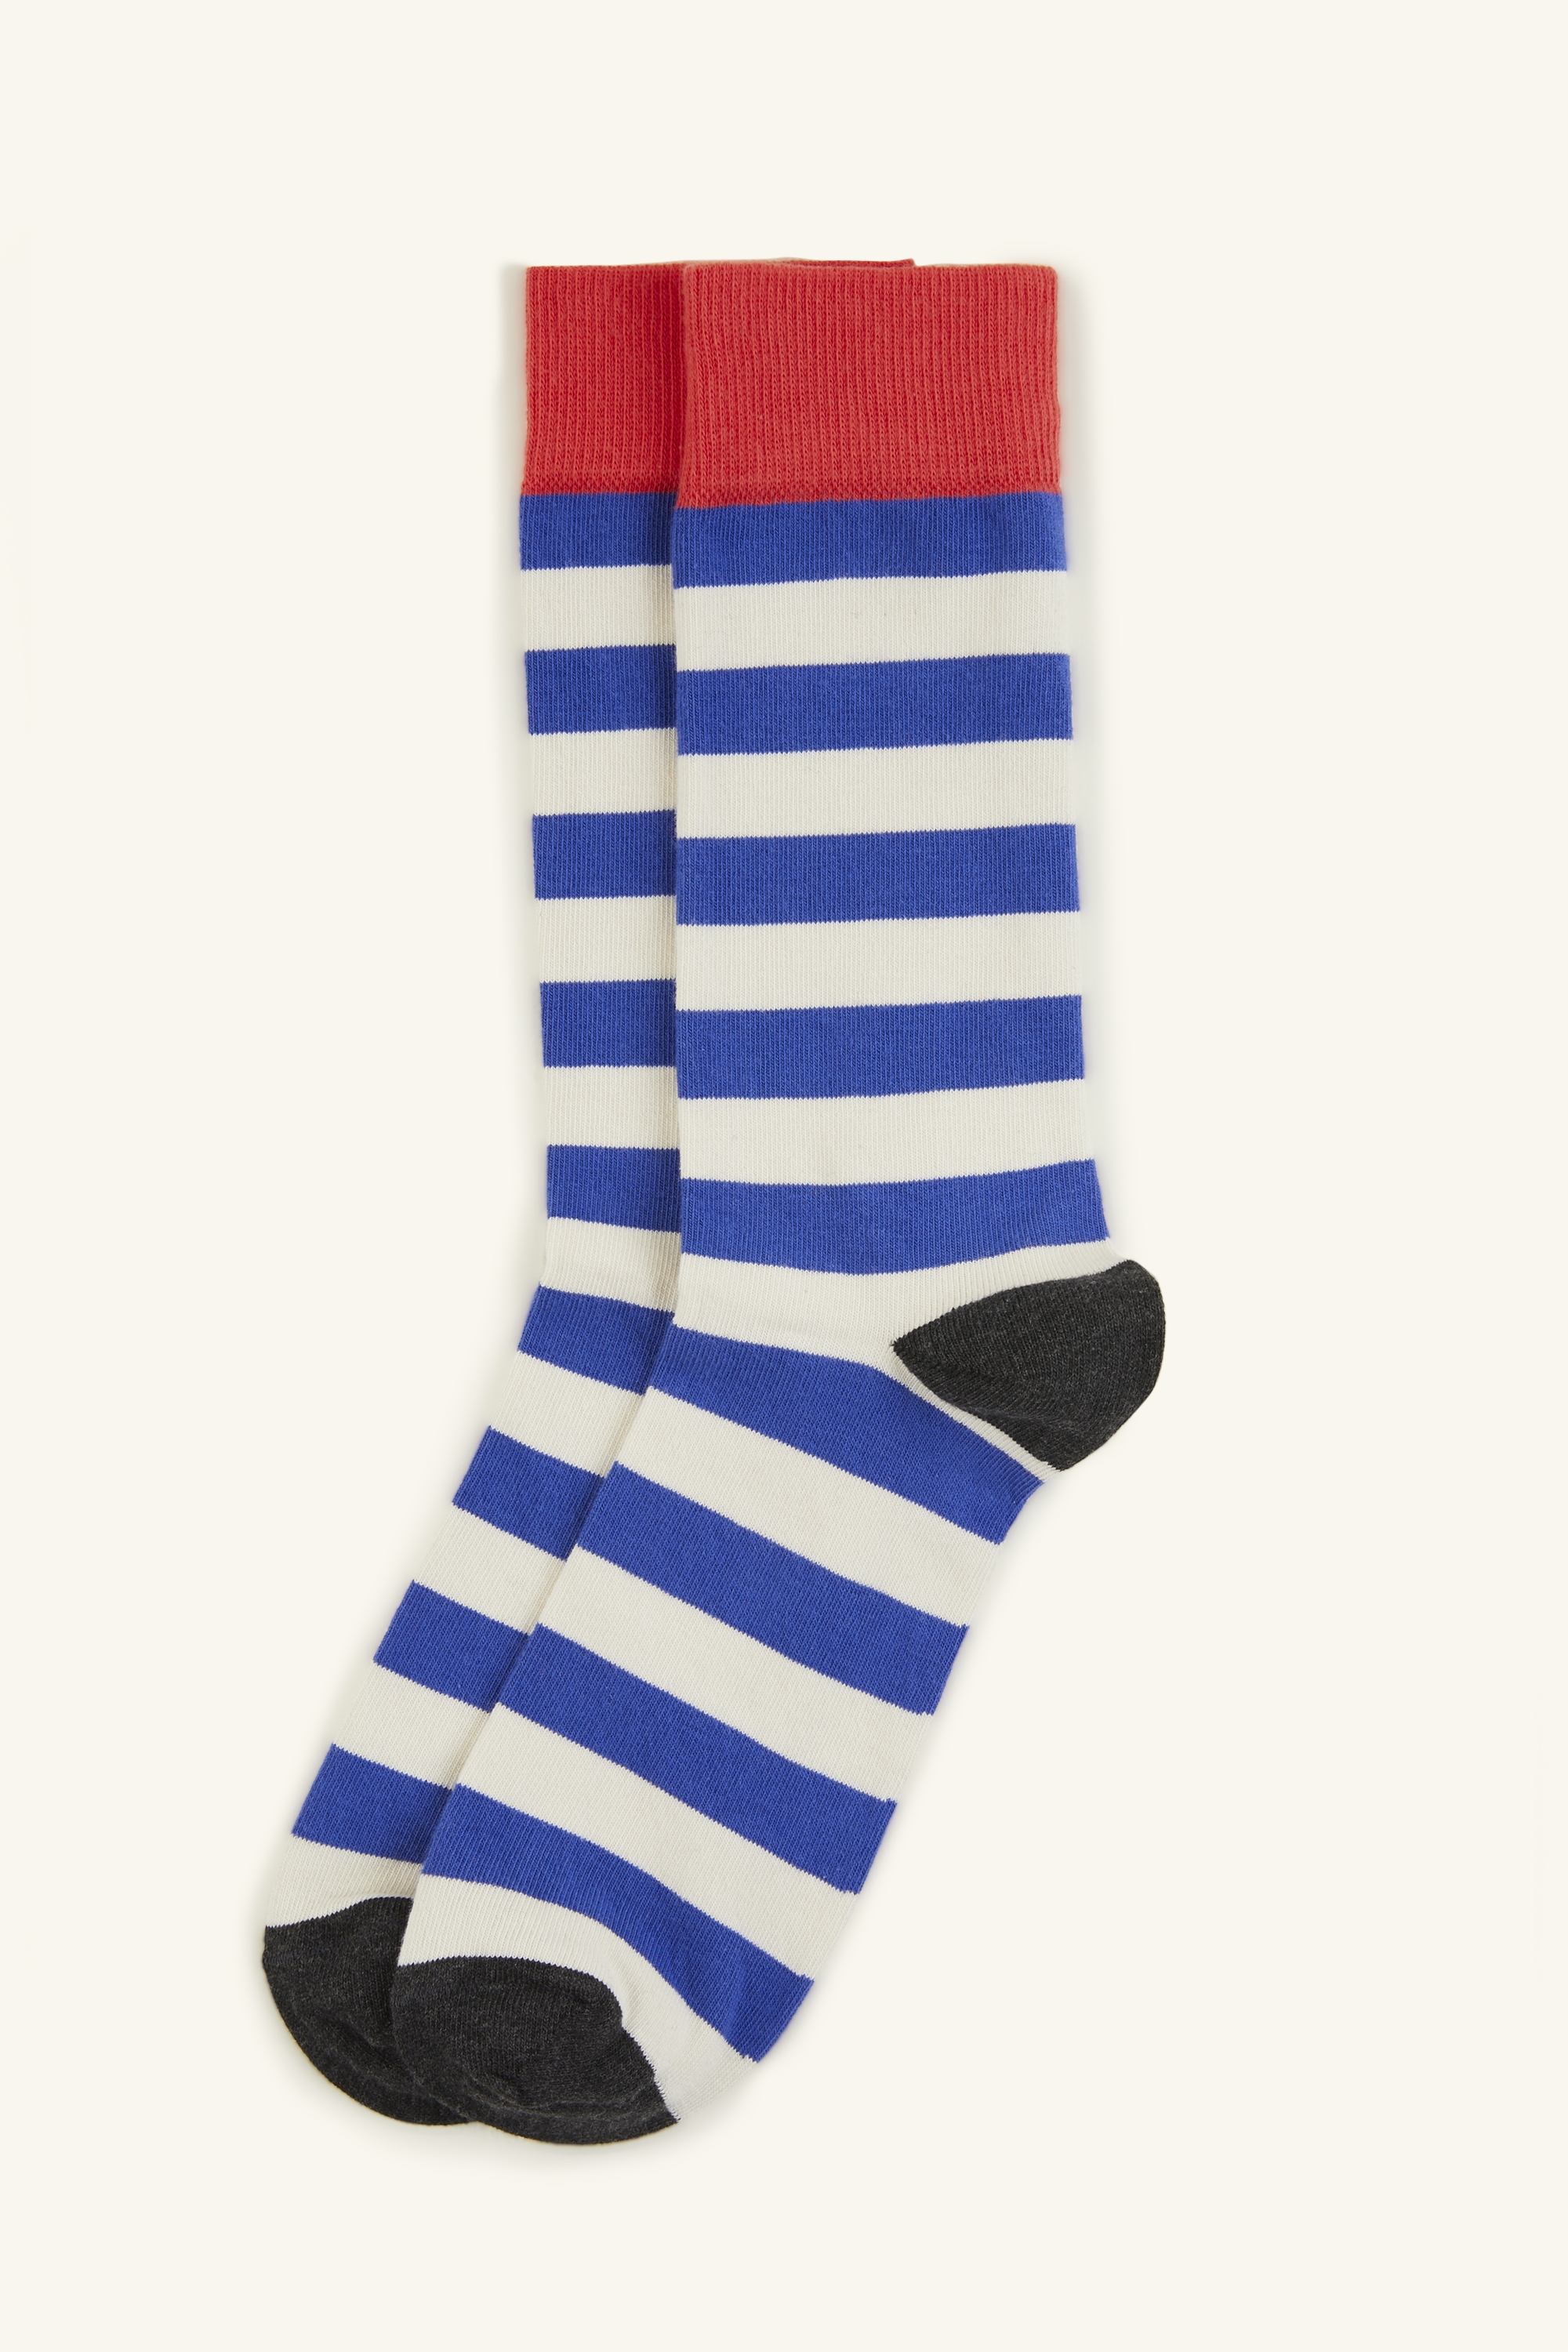 HS by Happy Socks Blue with White Stripe Sock